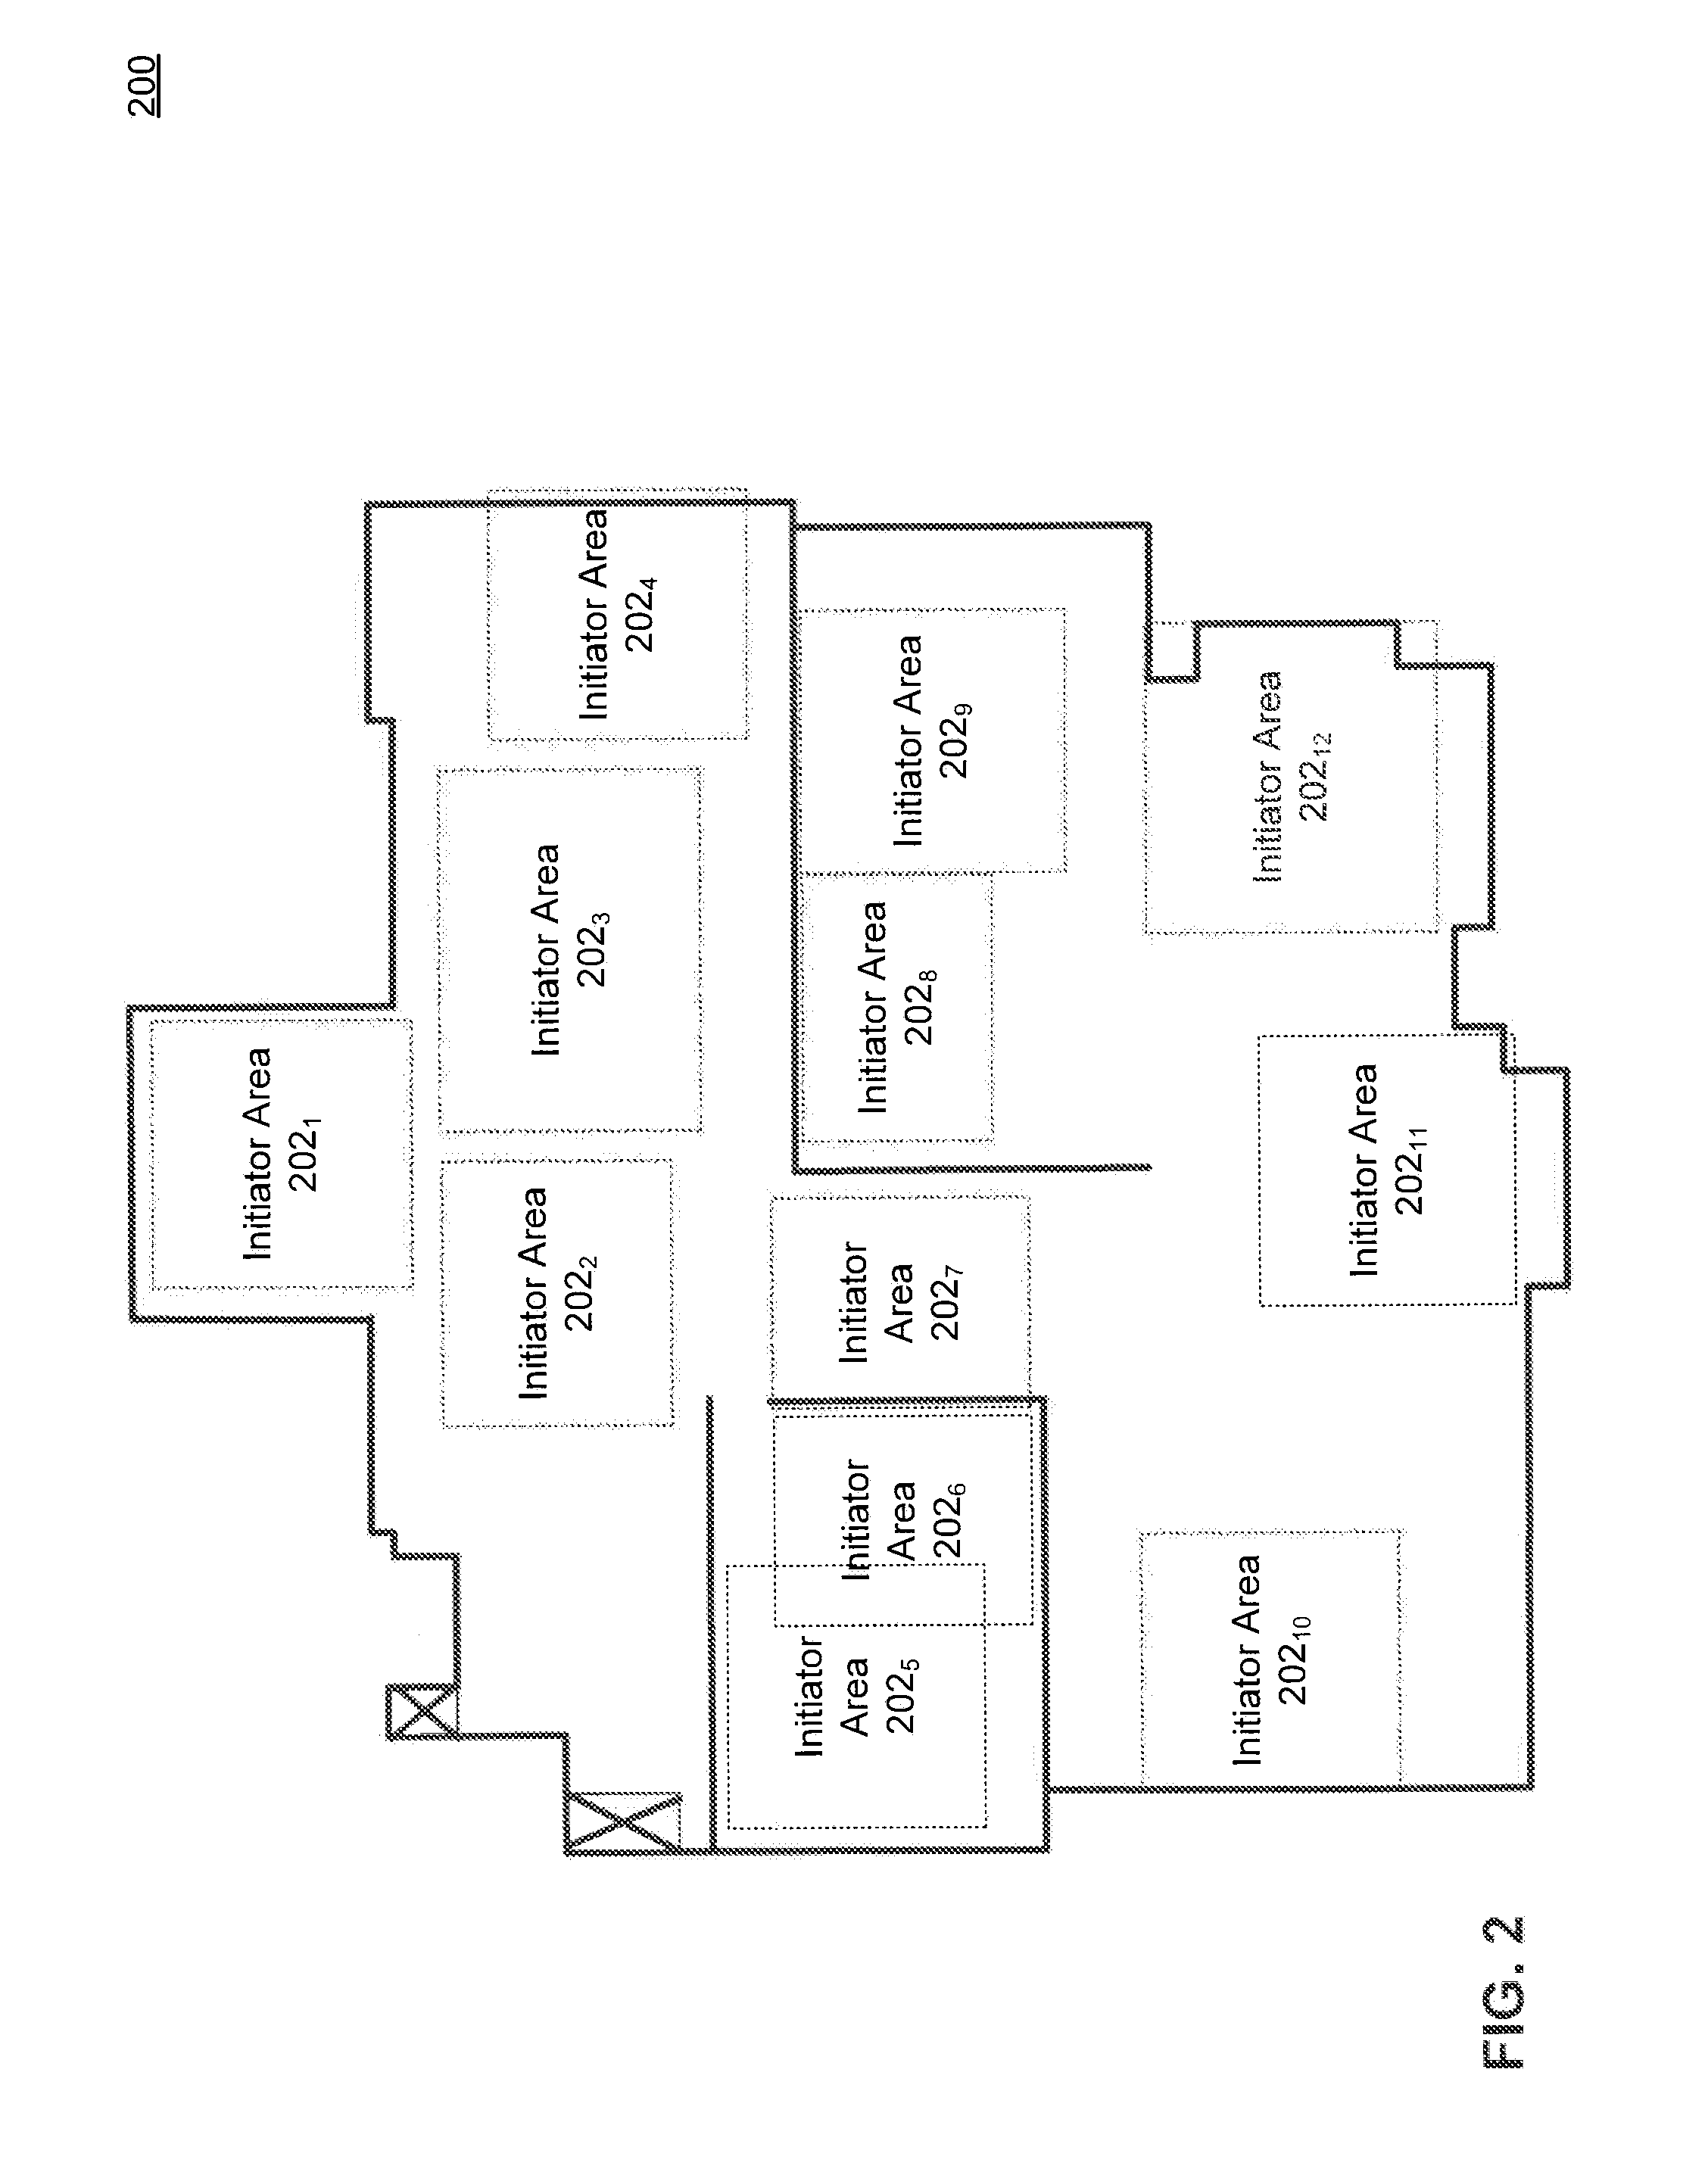 Distributed Speech Recognition System